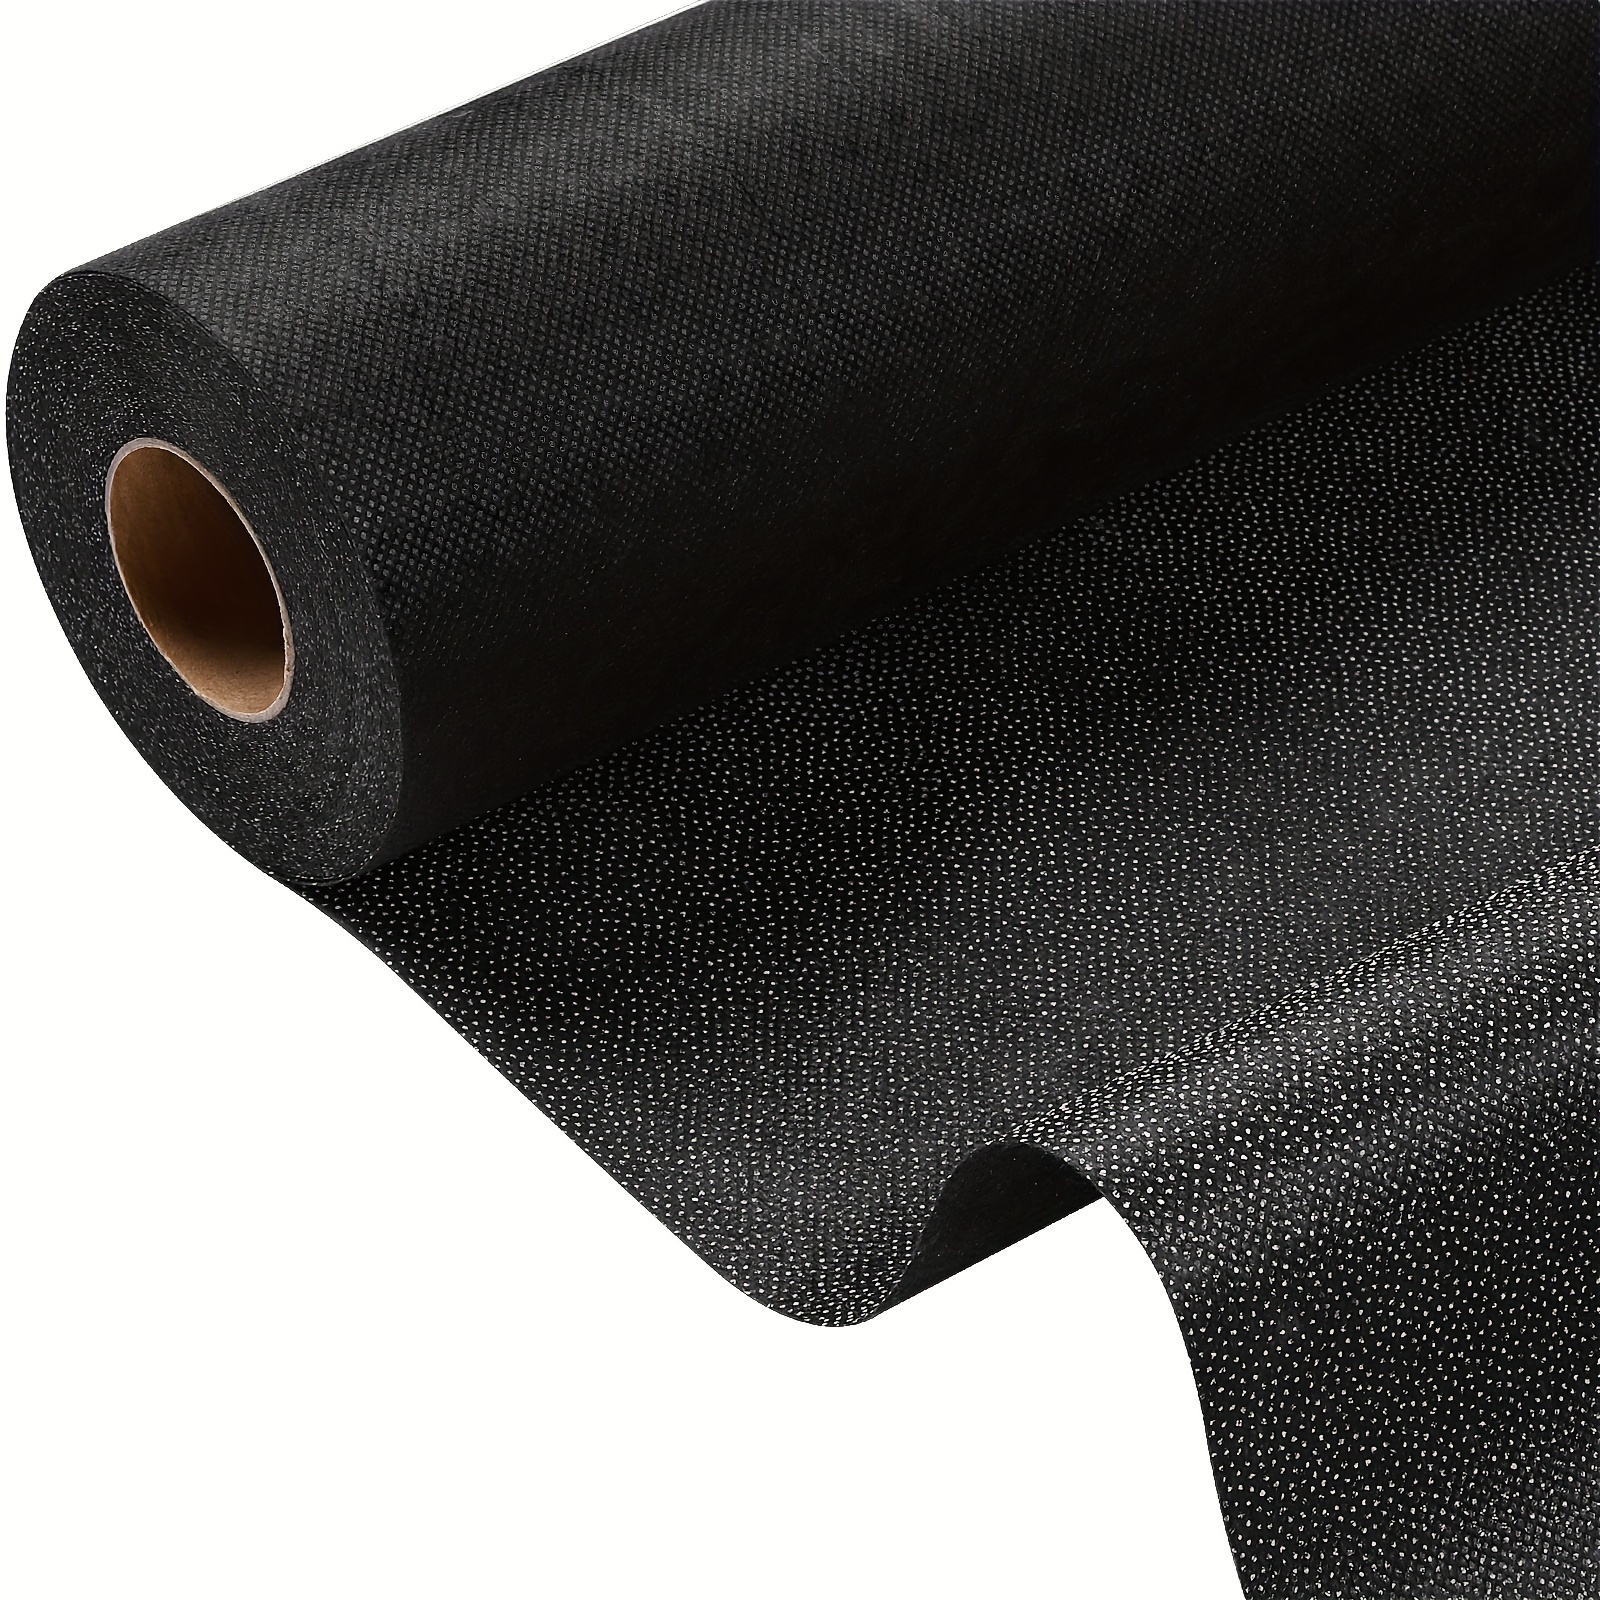 PLANTIONAL Black Iron-On Non-Woven Fusible Interfacing: 39 x 72 inch Medium  Weight Non-Woven Interfacing Iron On Polyester Single-Sided Interfacing